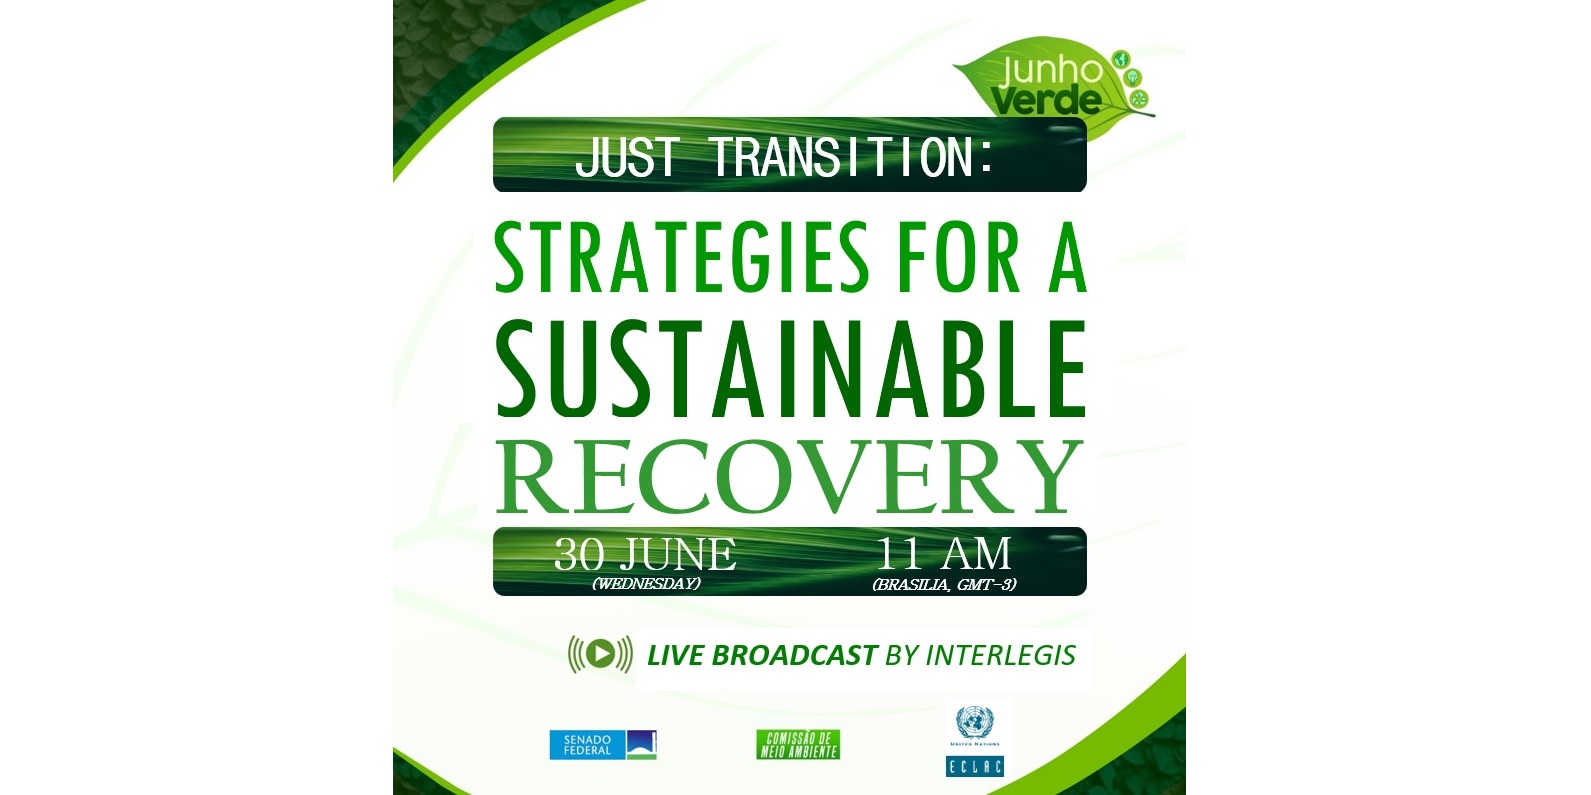 Just transition: strategies for a sustainable recovery